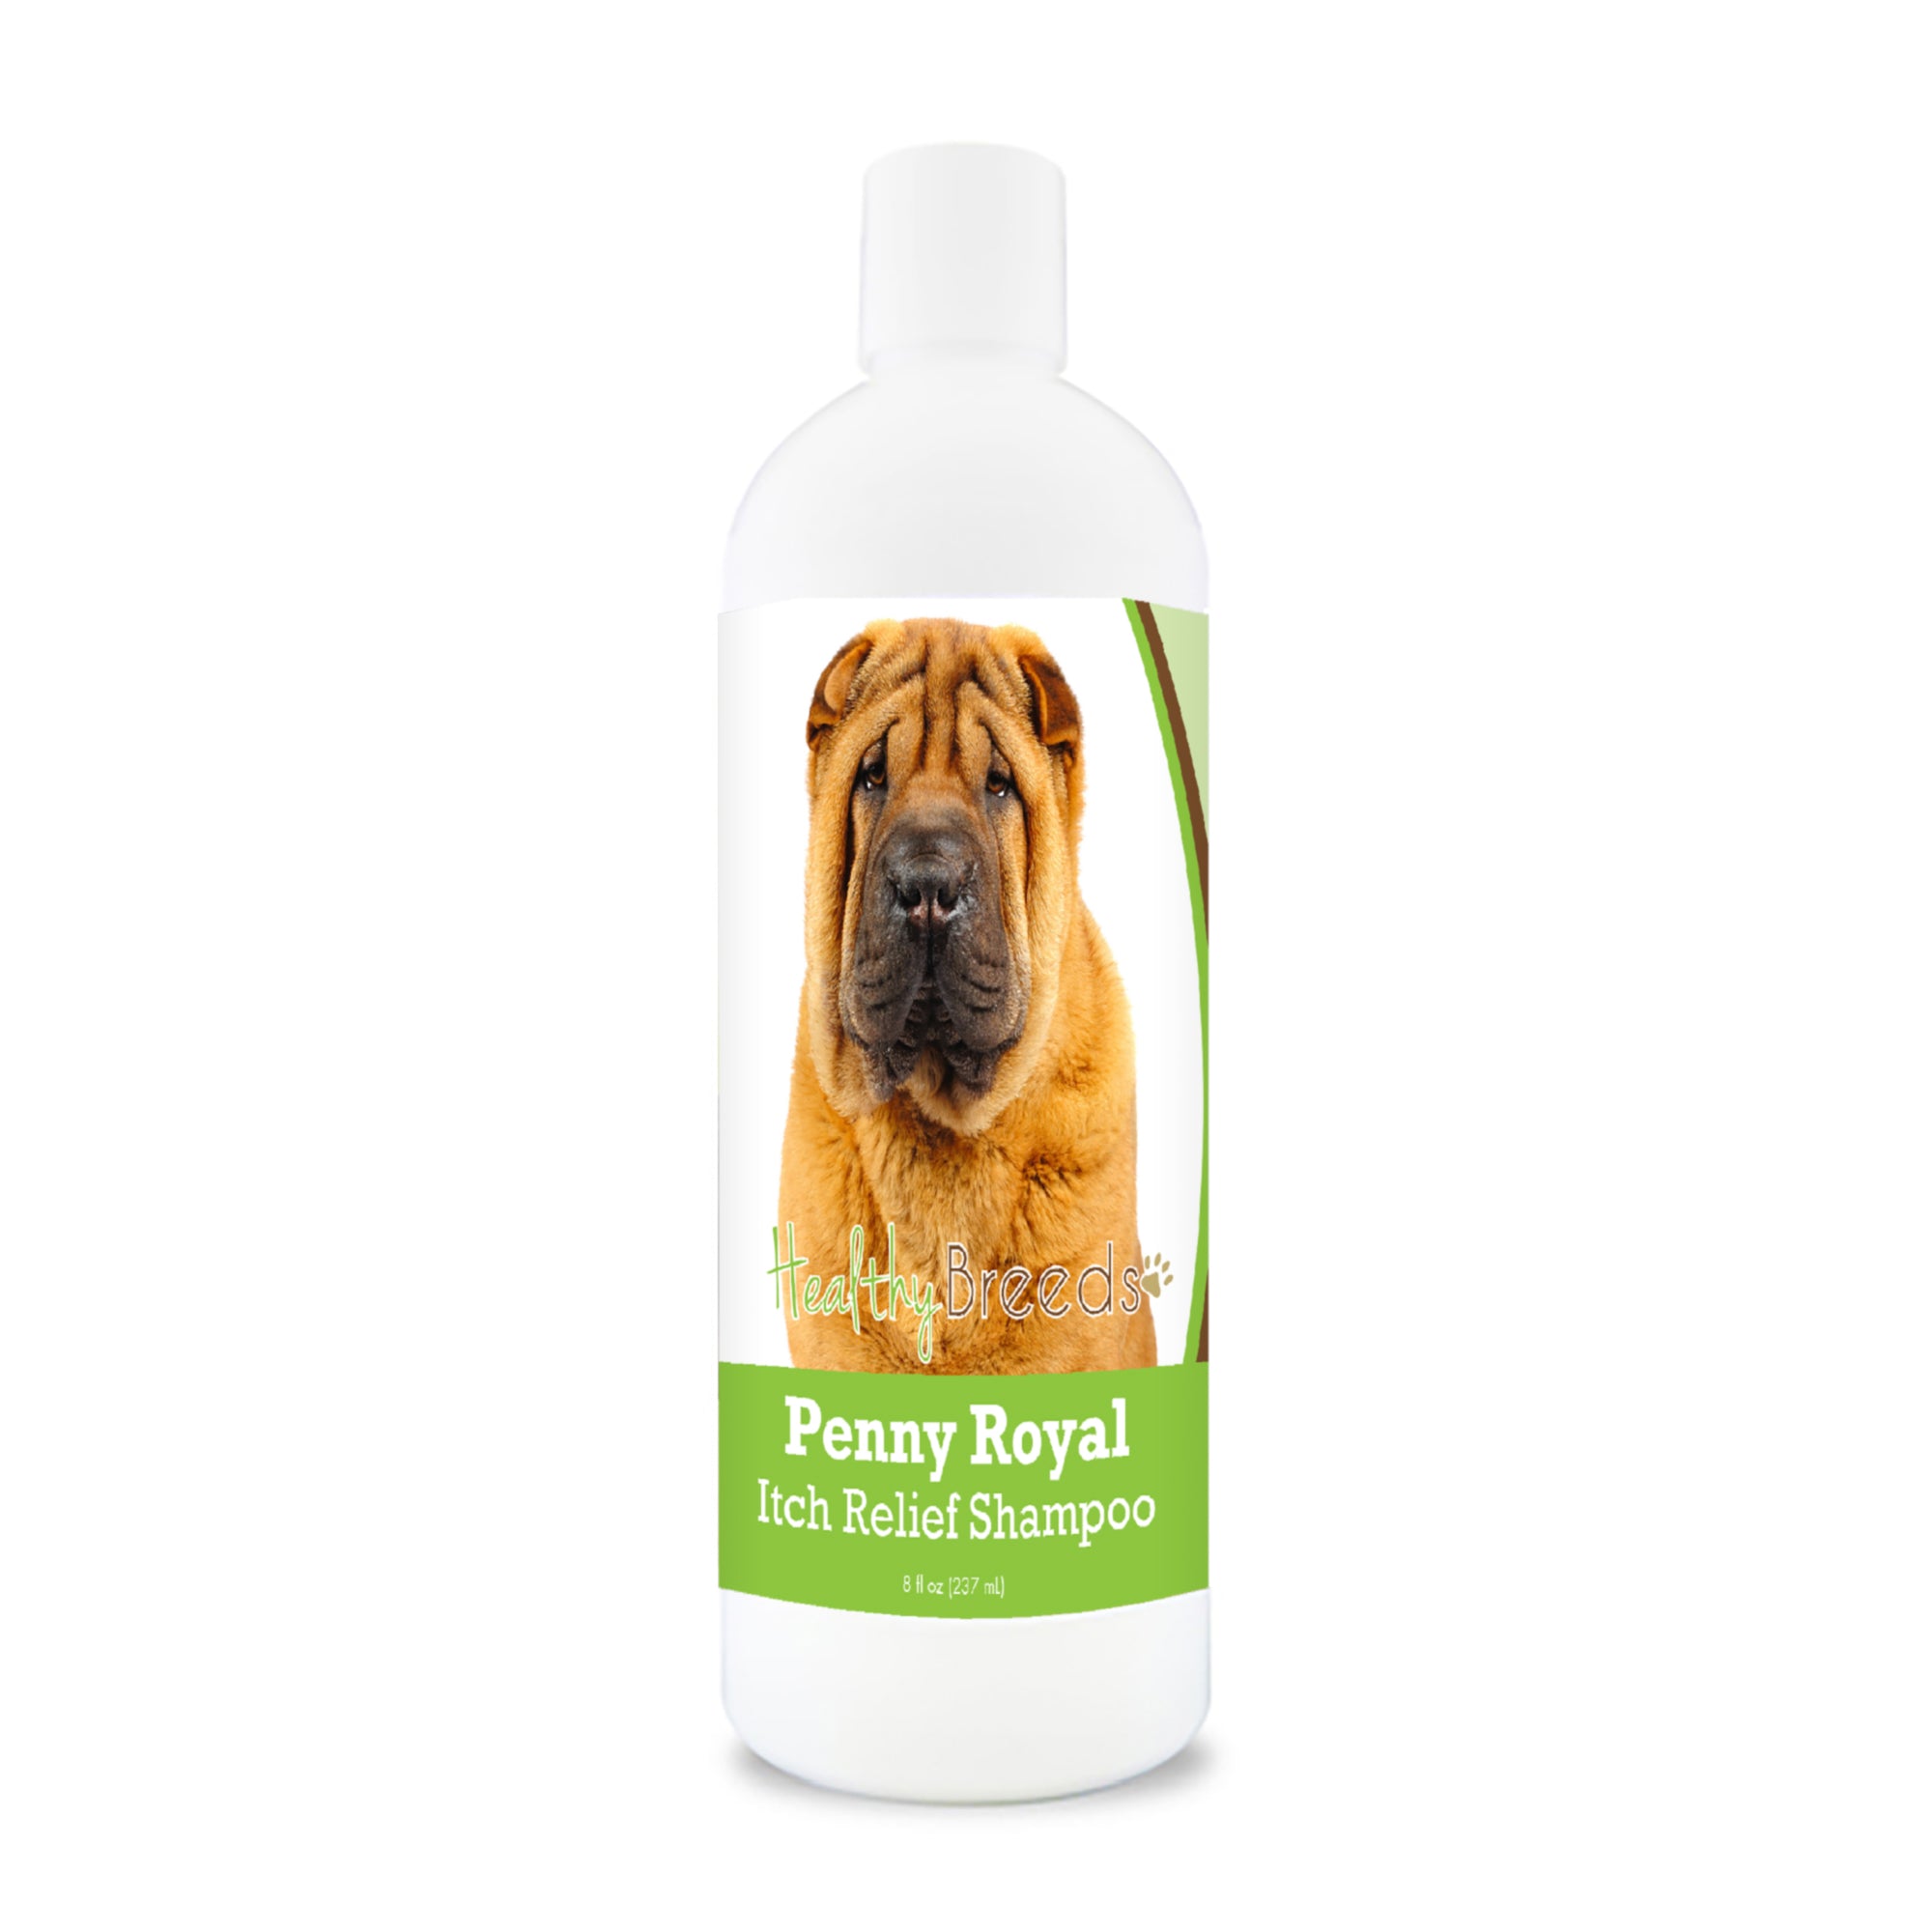 Chinese Shar Pei Penny Royal Itch Relief Shampoo 8 oz